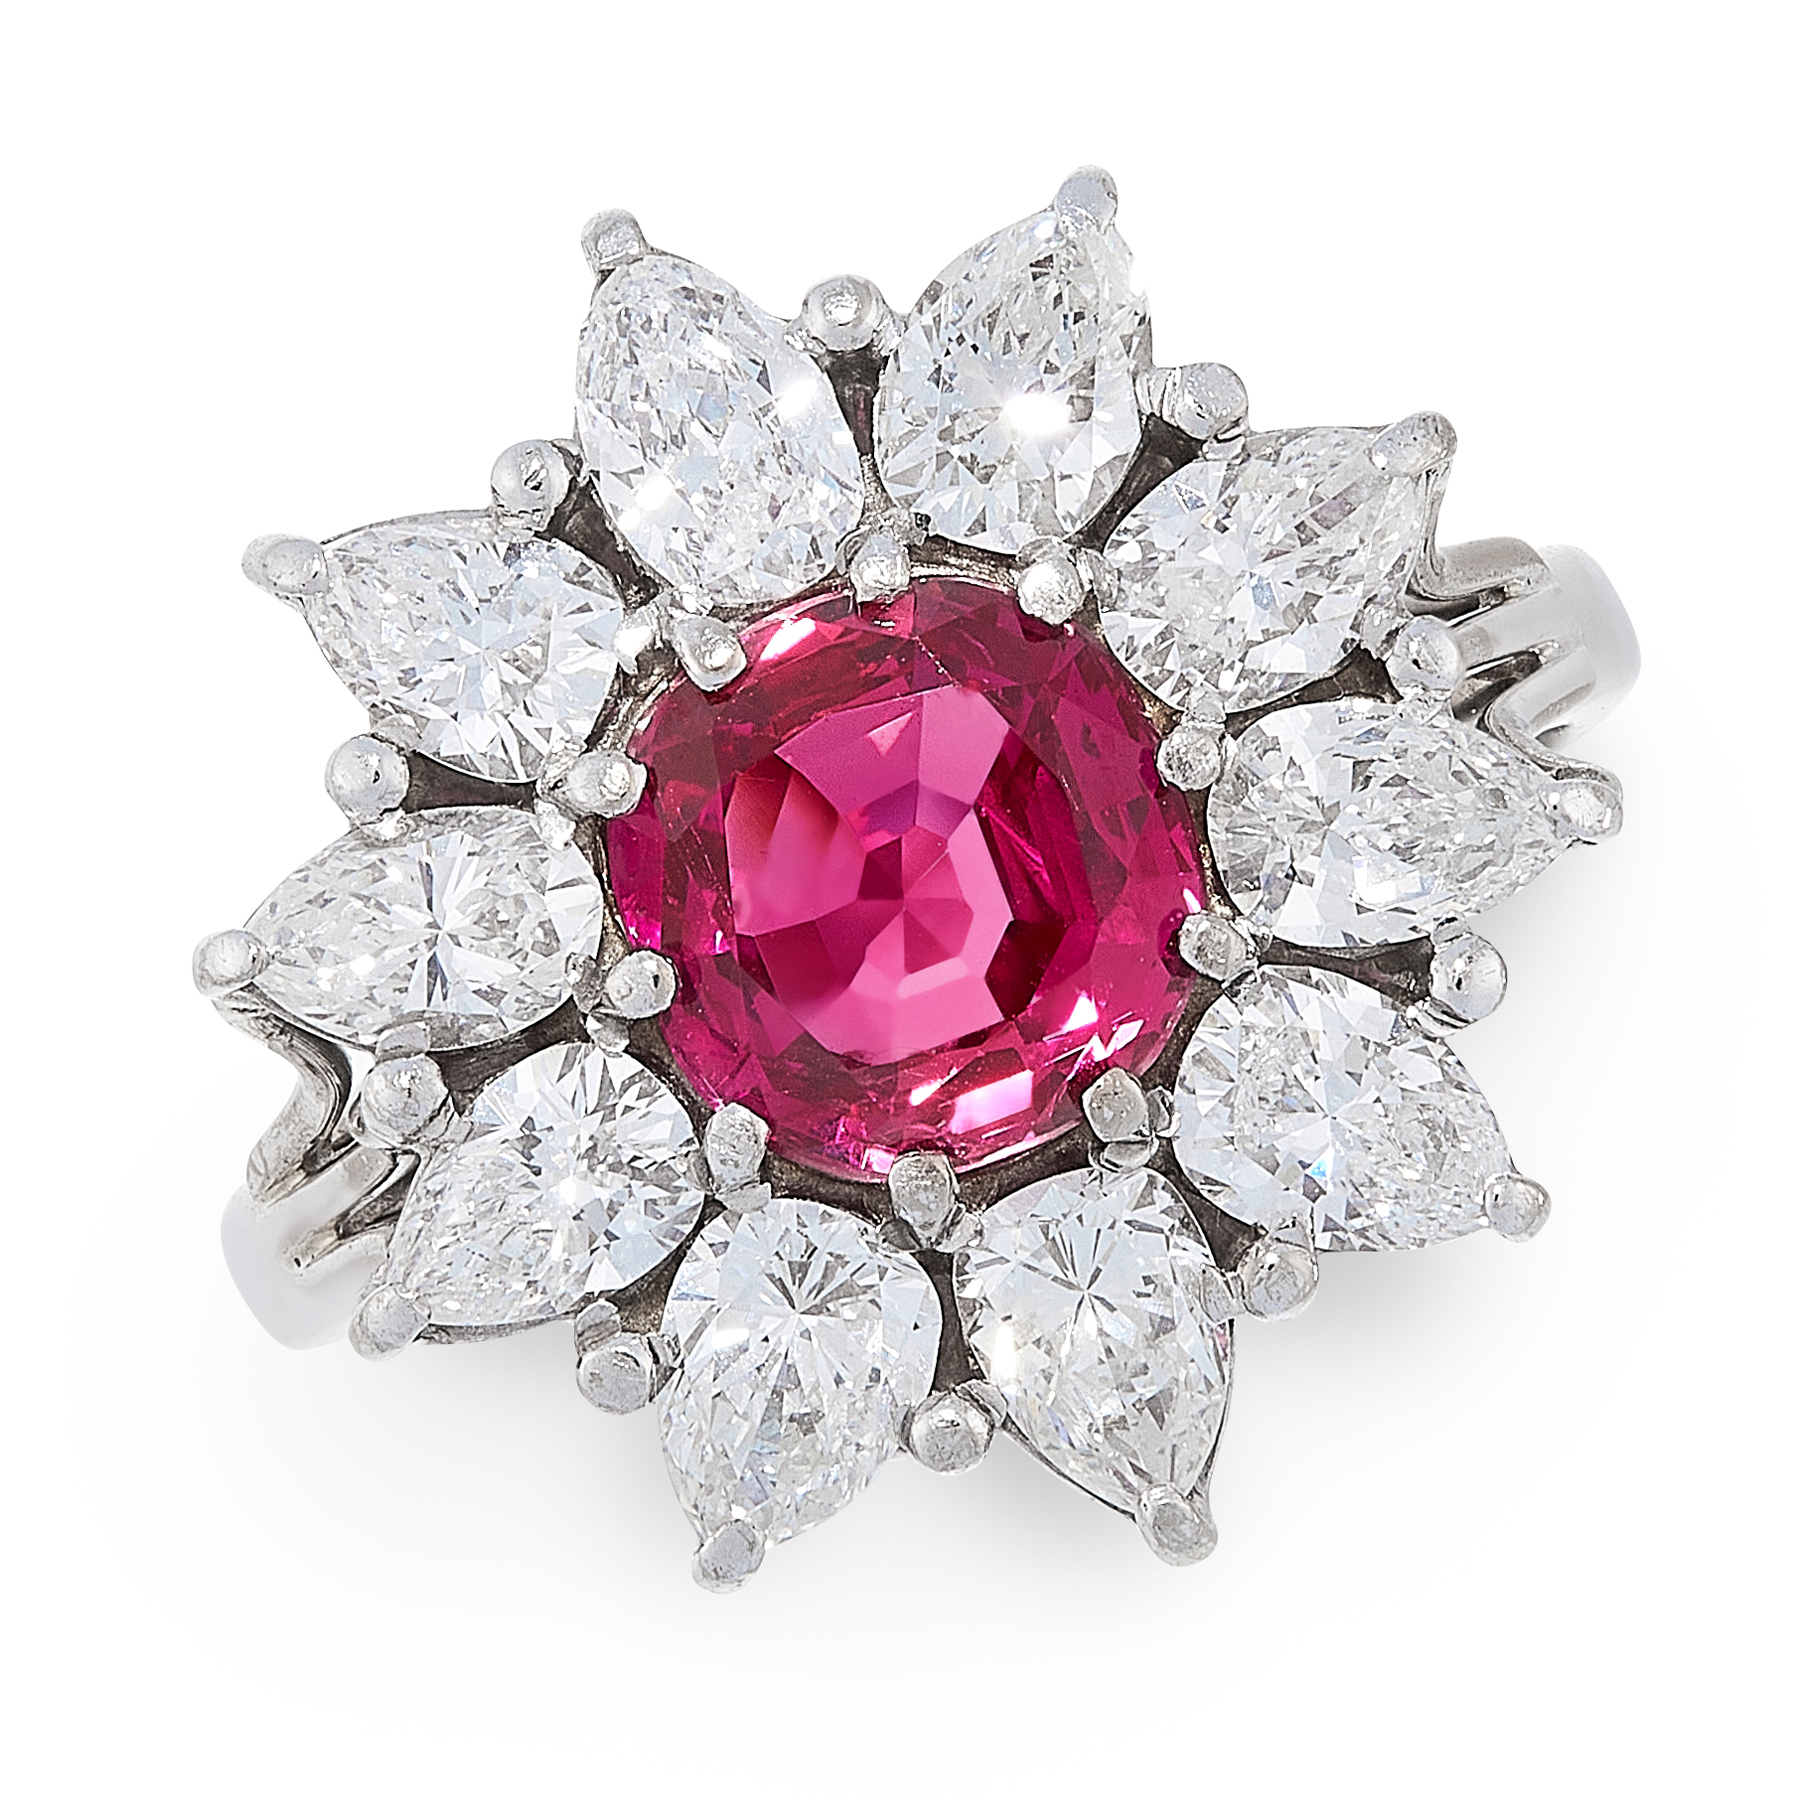 A BURMA NO HEAT RUBY AND DIAMOND RING in 18ct white gold, set with a central cushion cut ruby of 2.0